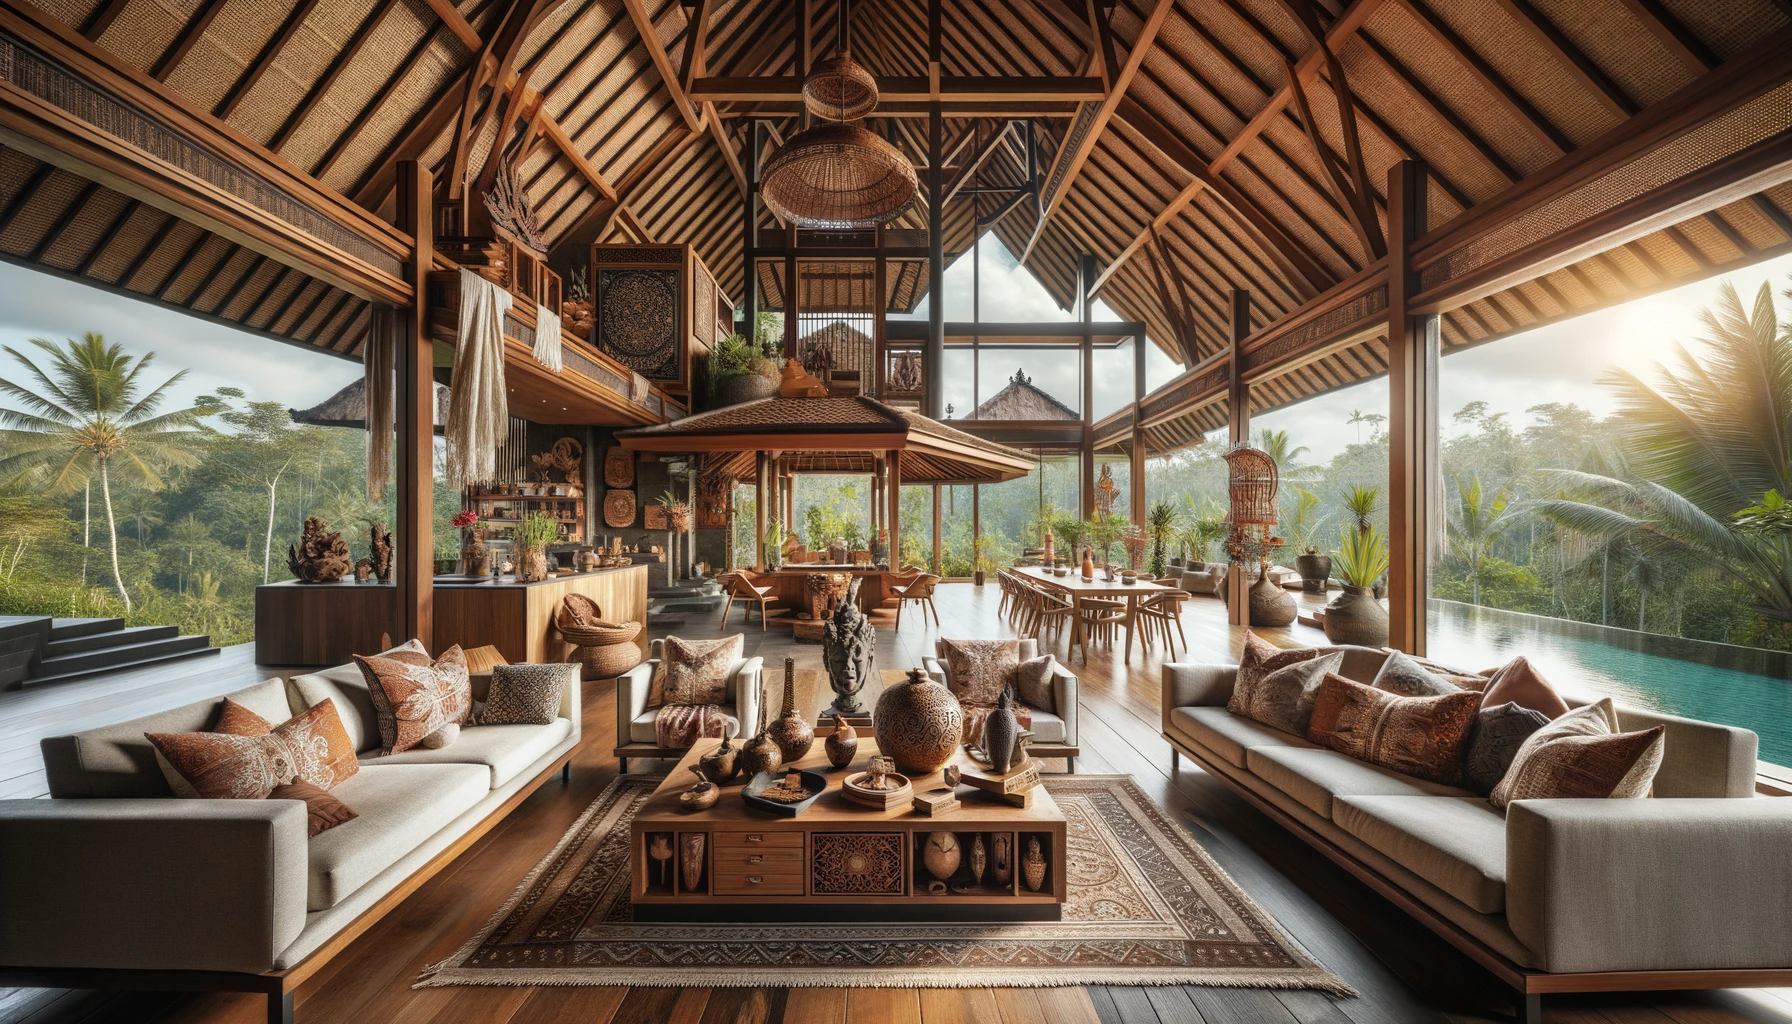 4K render of the interior living room of a Bali luxury treehouse. The space boasts high ceilings with exposed wooden beams and large panoramic windows offering breathtaking views of the tropical rainforest. Traditional Balinese textiles and decor accentuate the room, with plush seating arrangements around a low wooden coffee table. Handcrafted wooden sculptures and art pieces are displayed throughout. An open-concept layout allows for a seamless transition to a modern kitchen with wooden cabinetry and stone countertops.